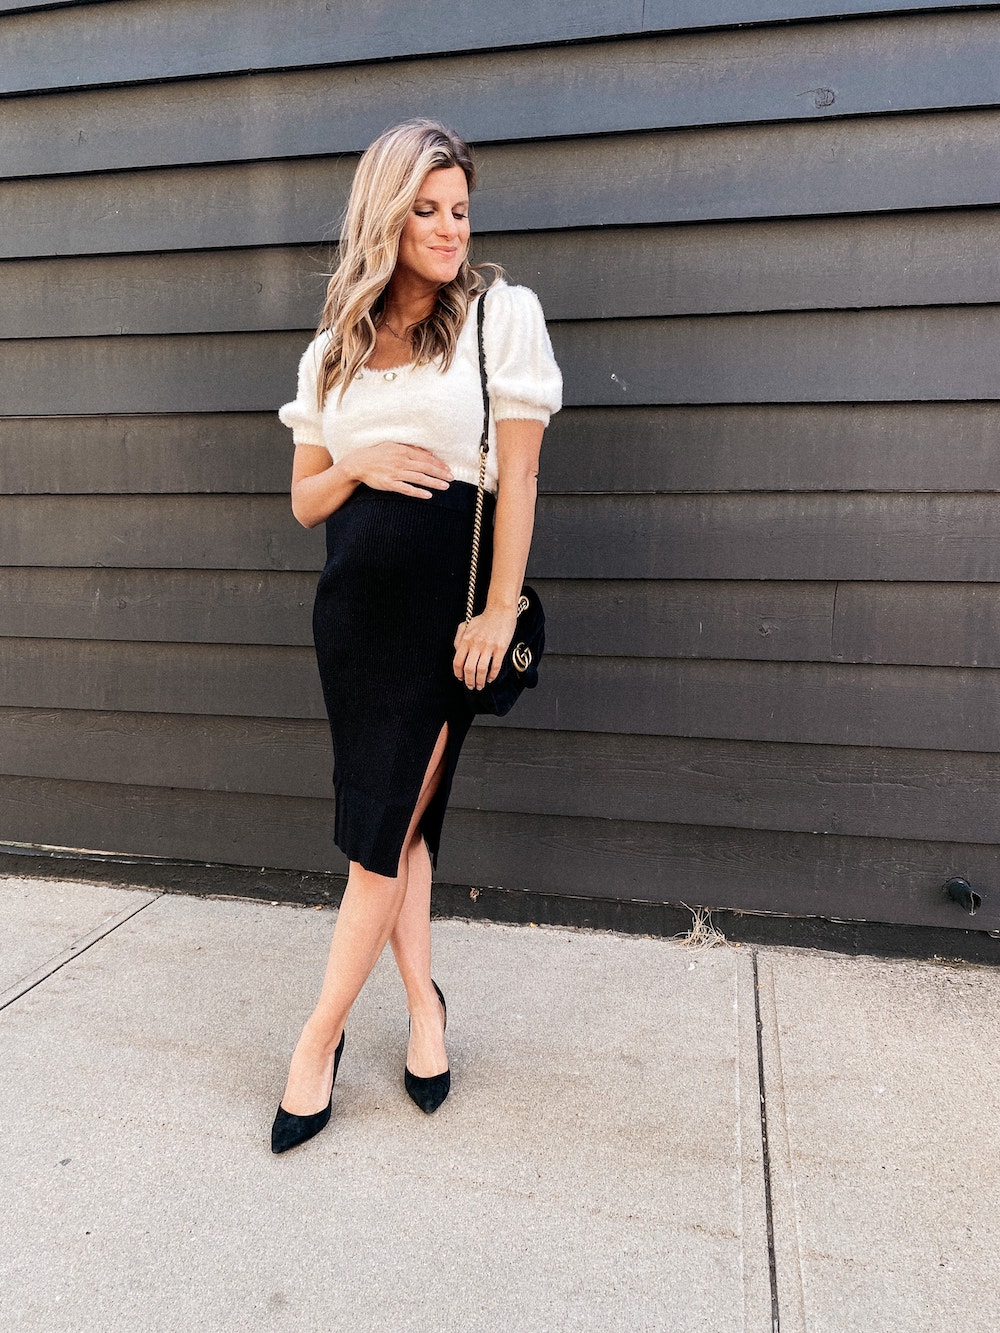 second trimester outfit idea black pencil skirt and cropped sweater